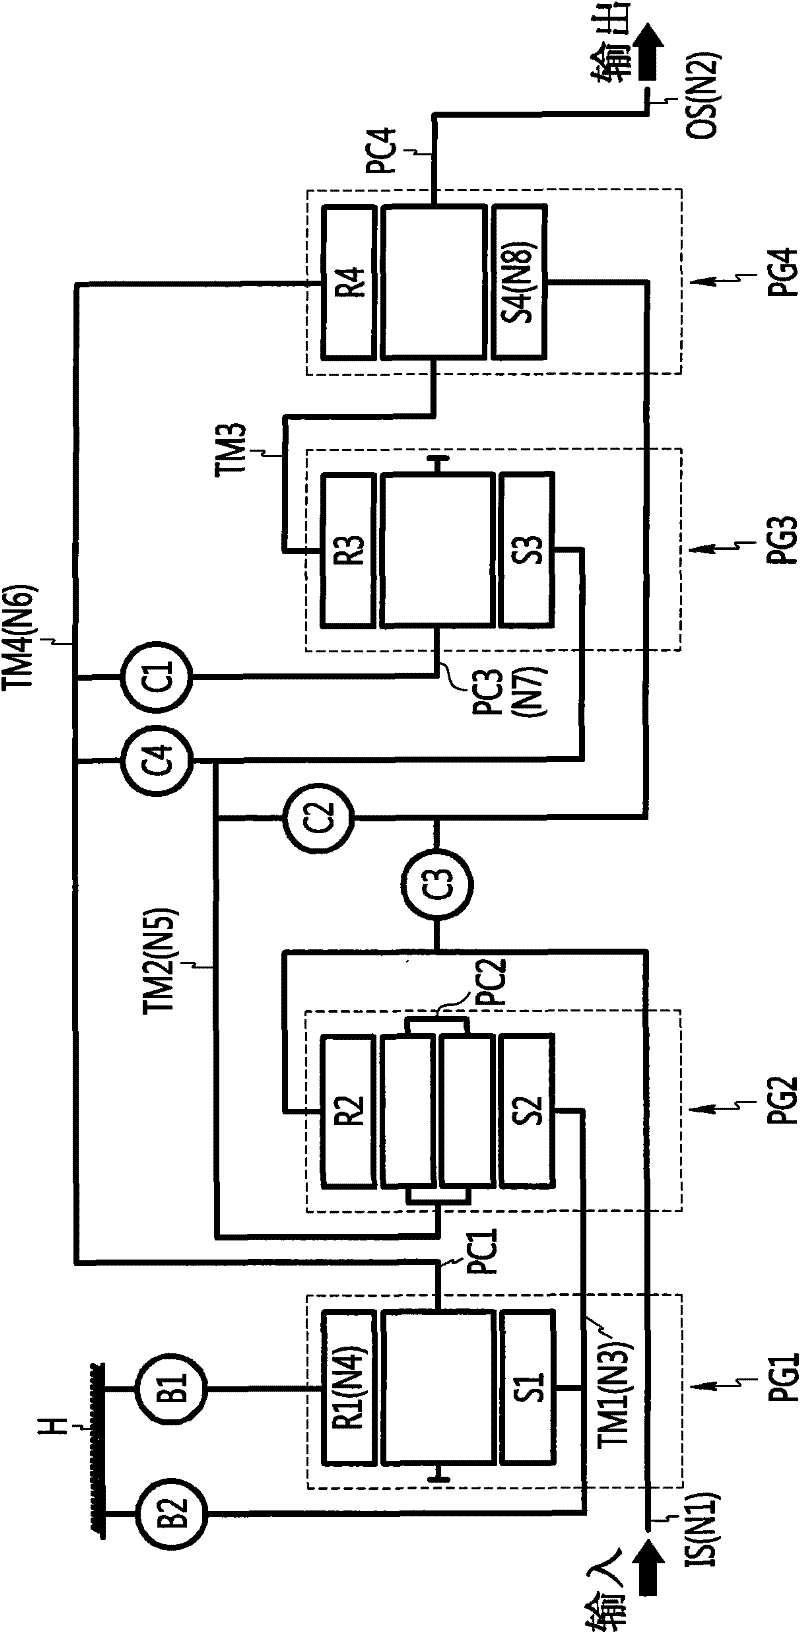 Transmission mechanism for an automatic transmission of a vehicle